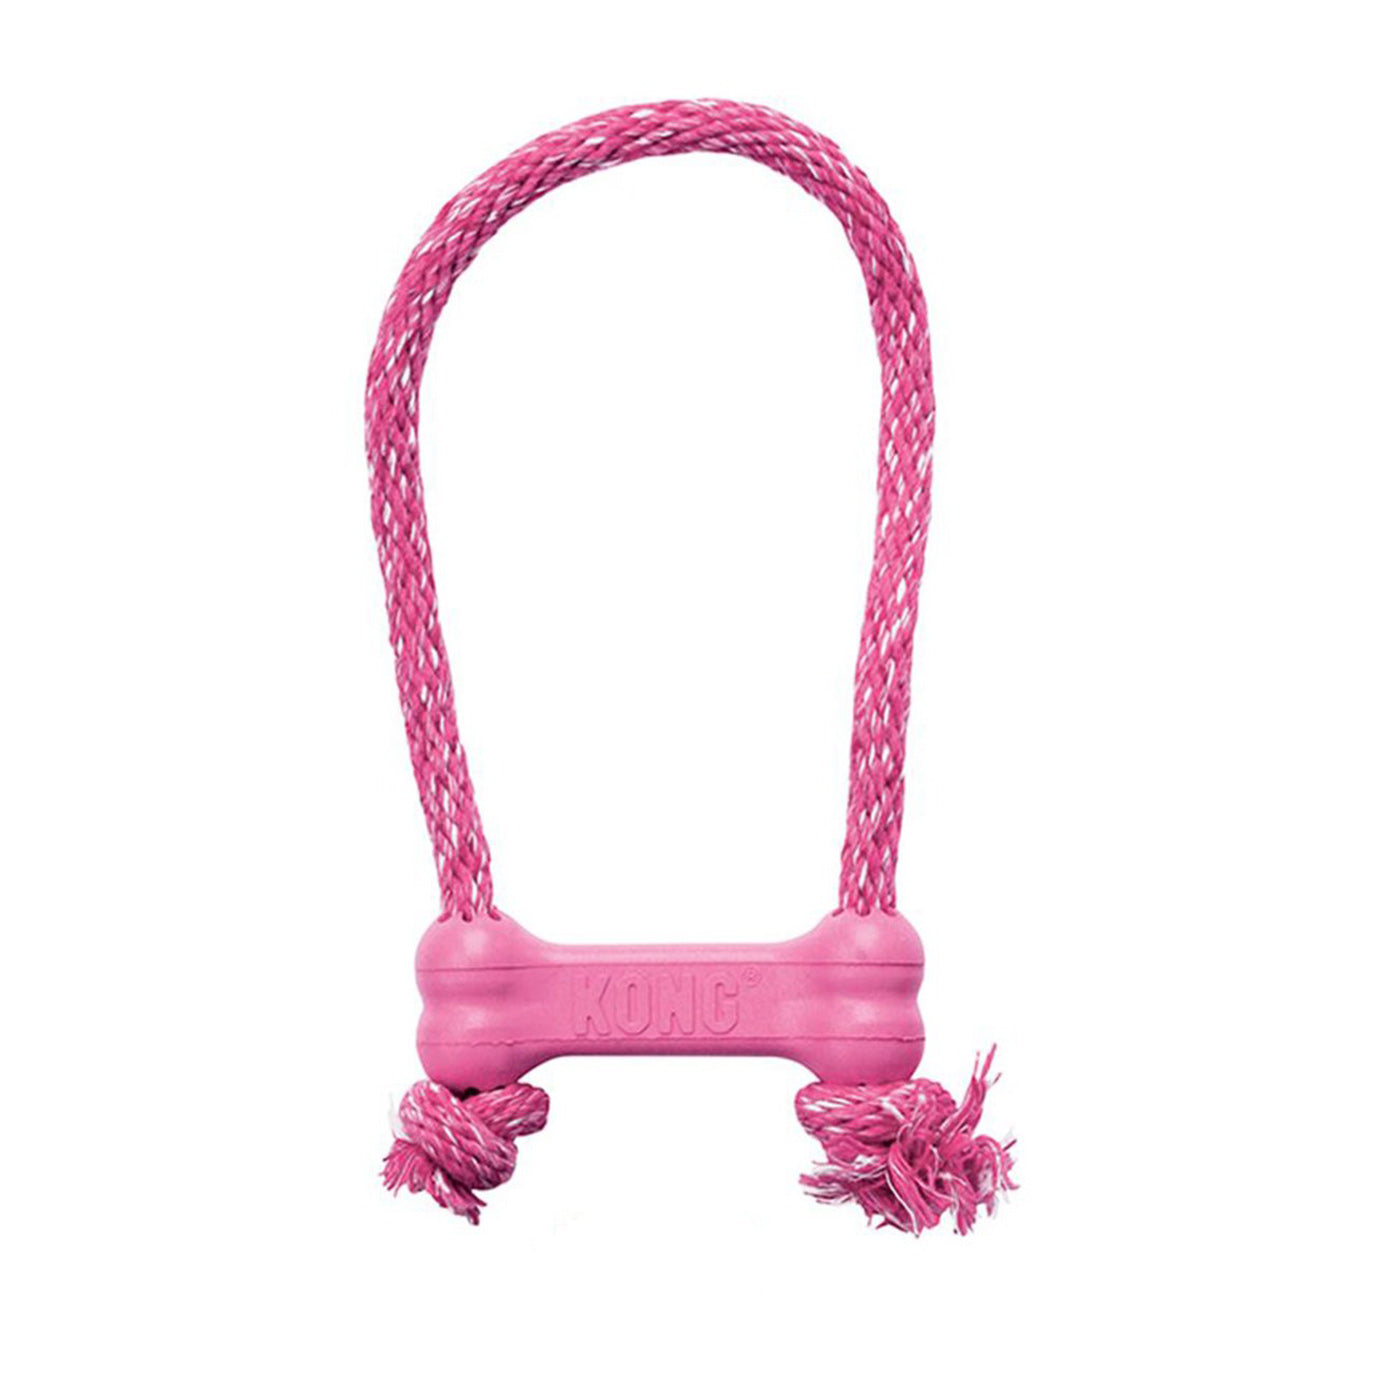 KONG Puppy Goodie Bone With Rope Pink